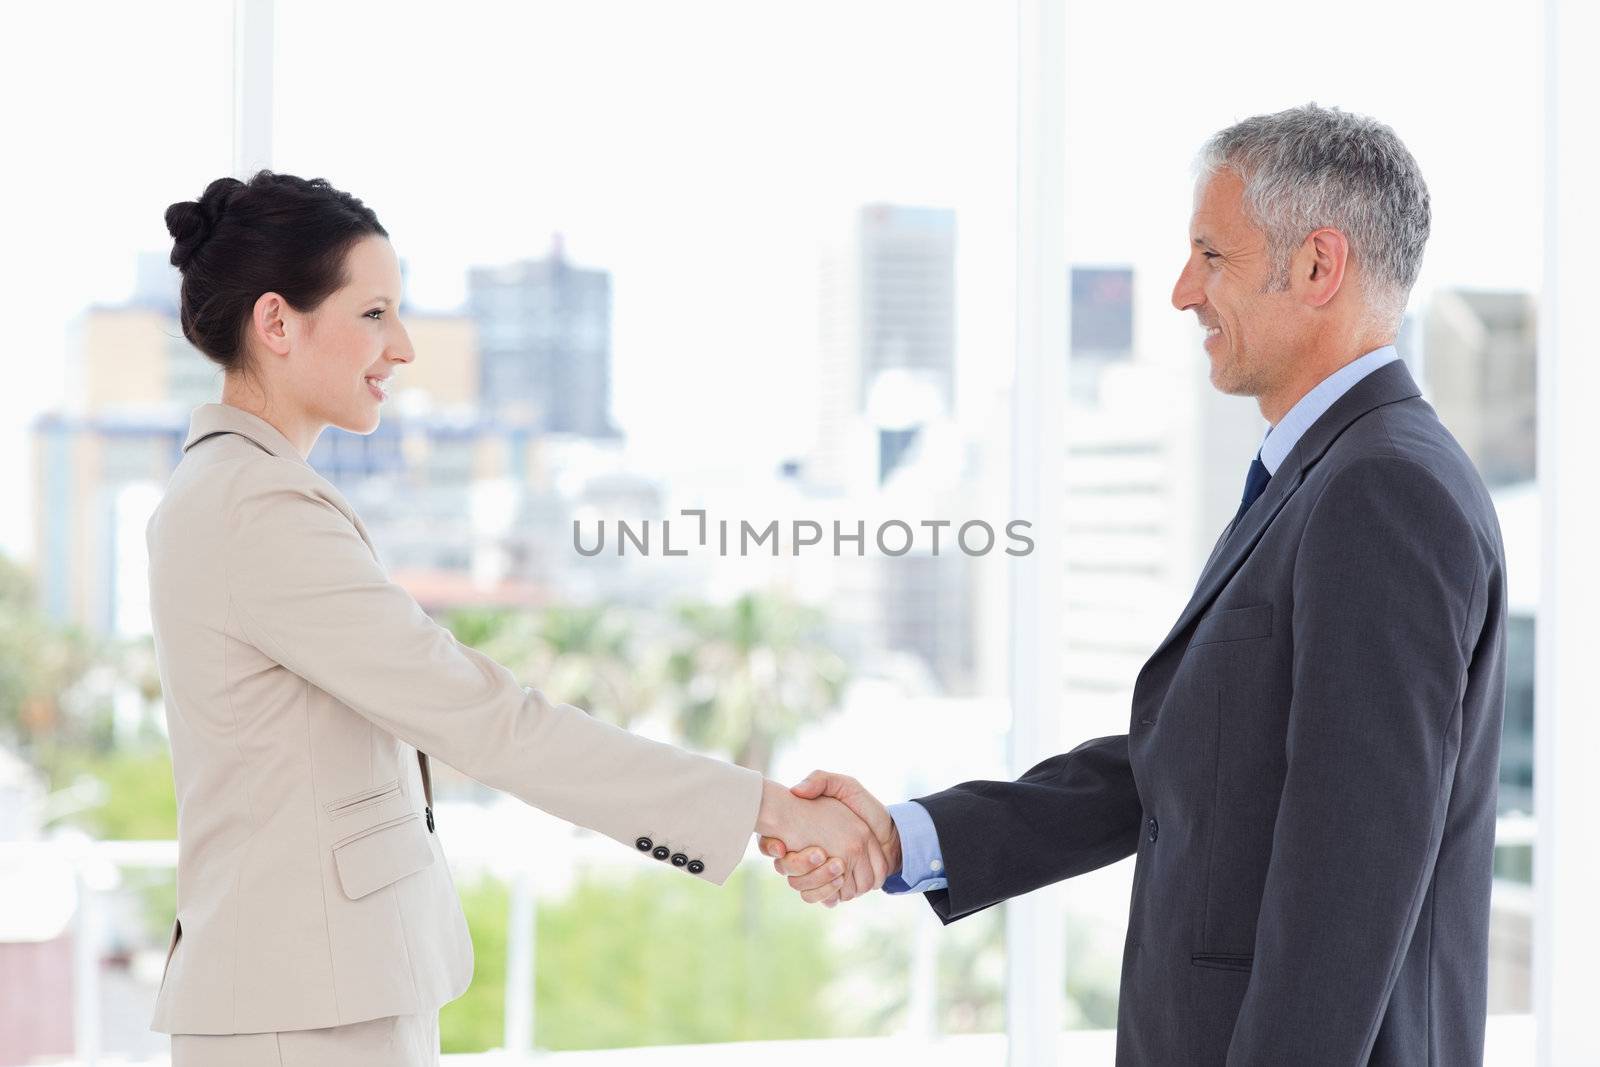 A director and his secretary shaking hands while smiling by Wavebreakmedia